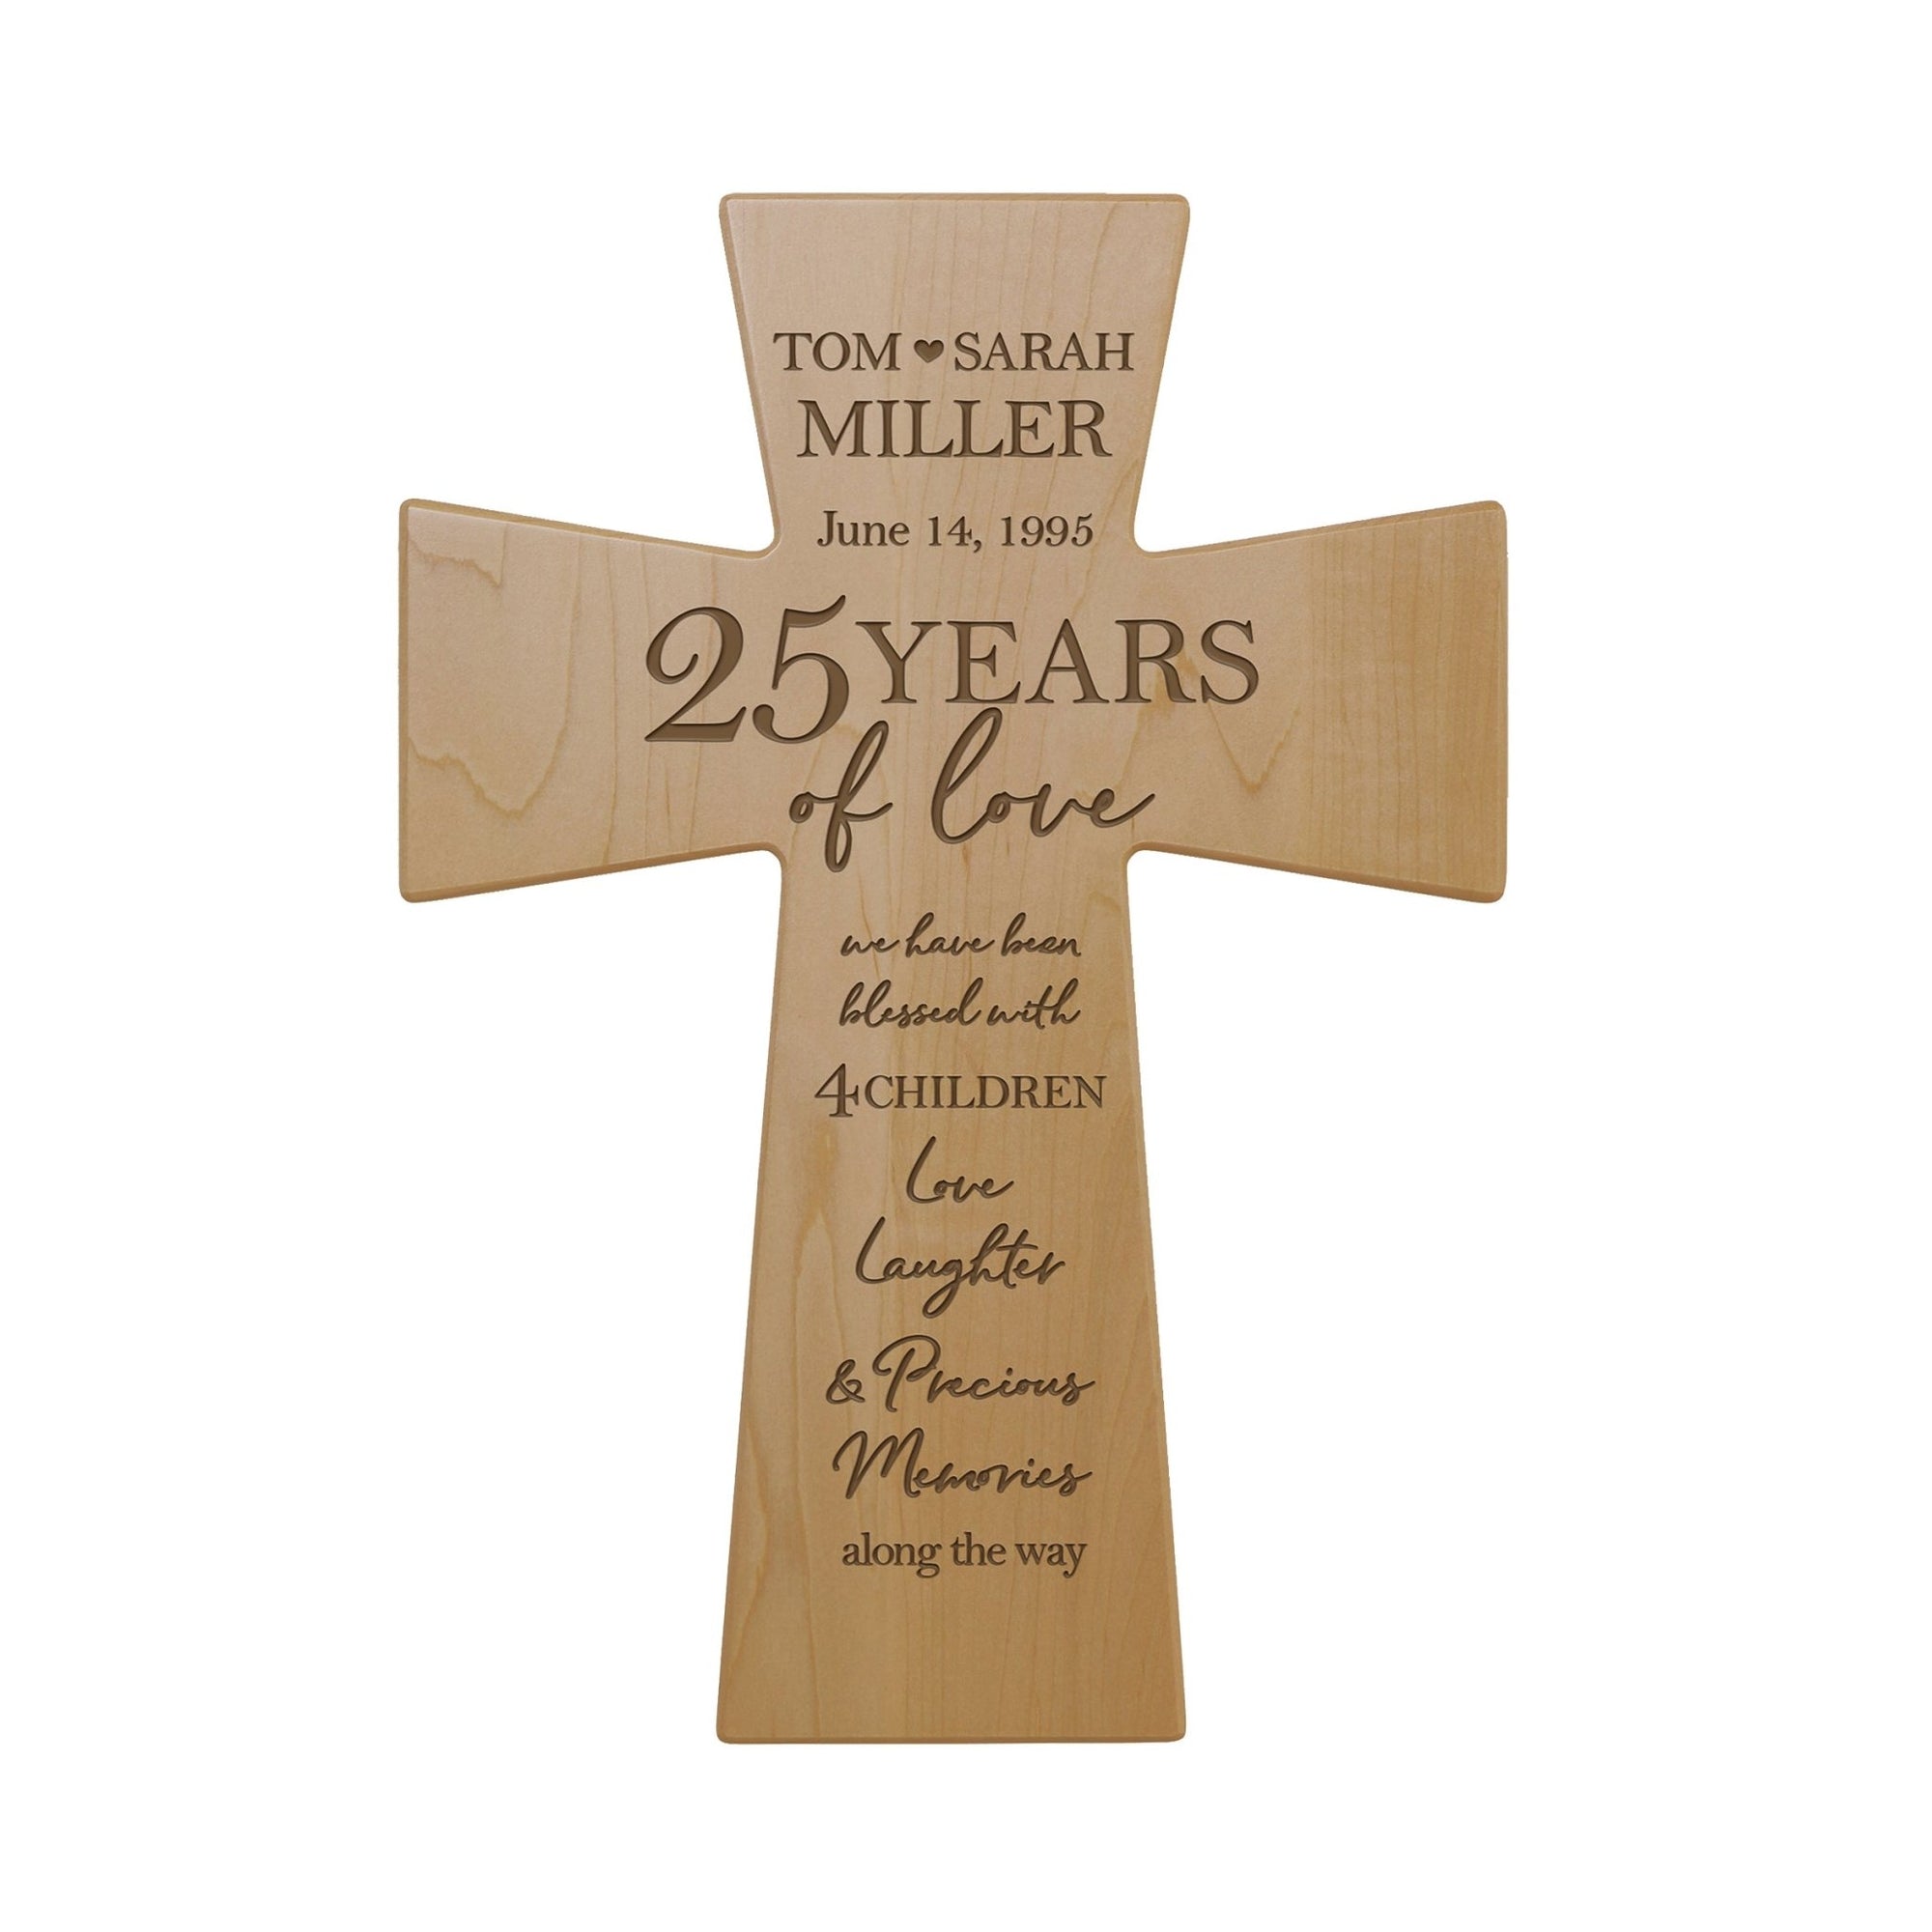 Unique Gifts for Couples - Customized Wall Cross for 25th Wedding Anniversary